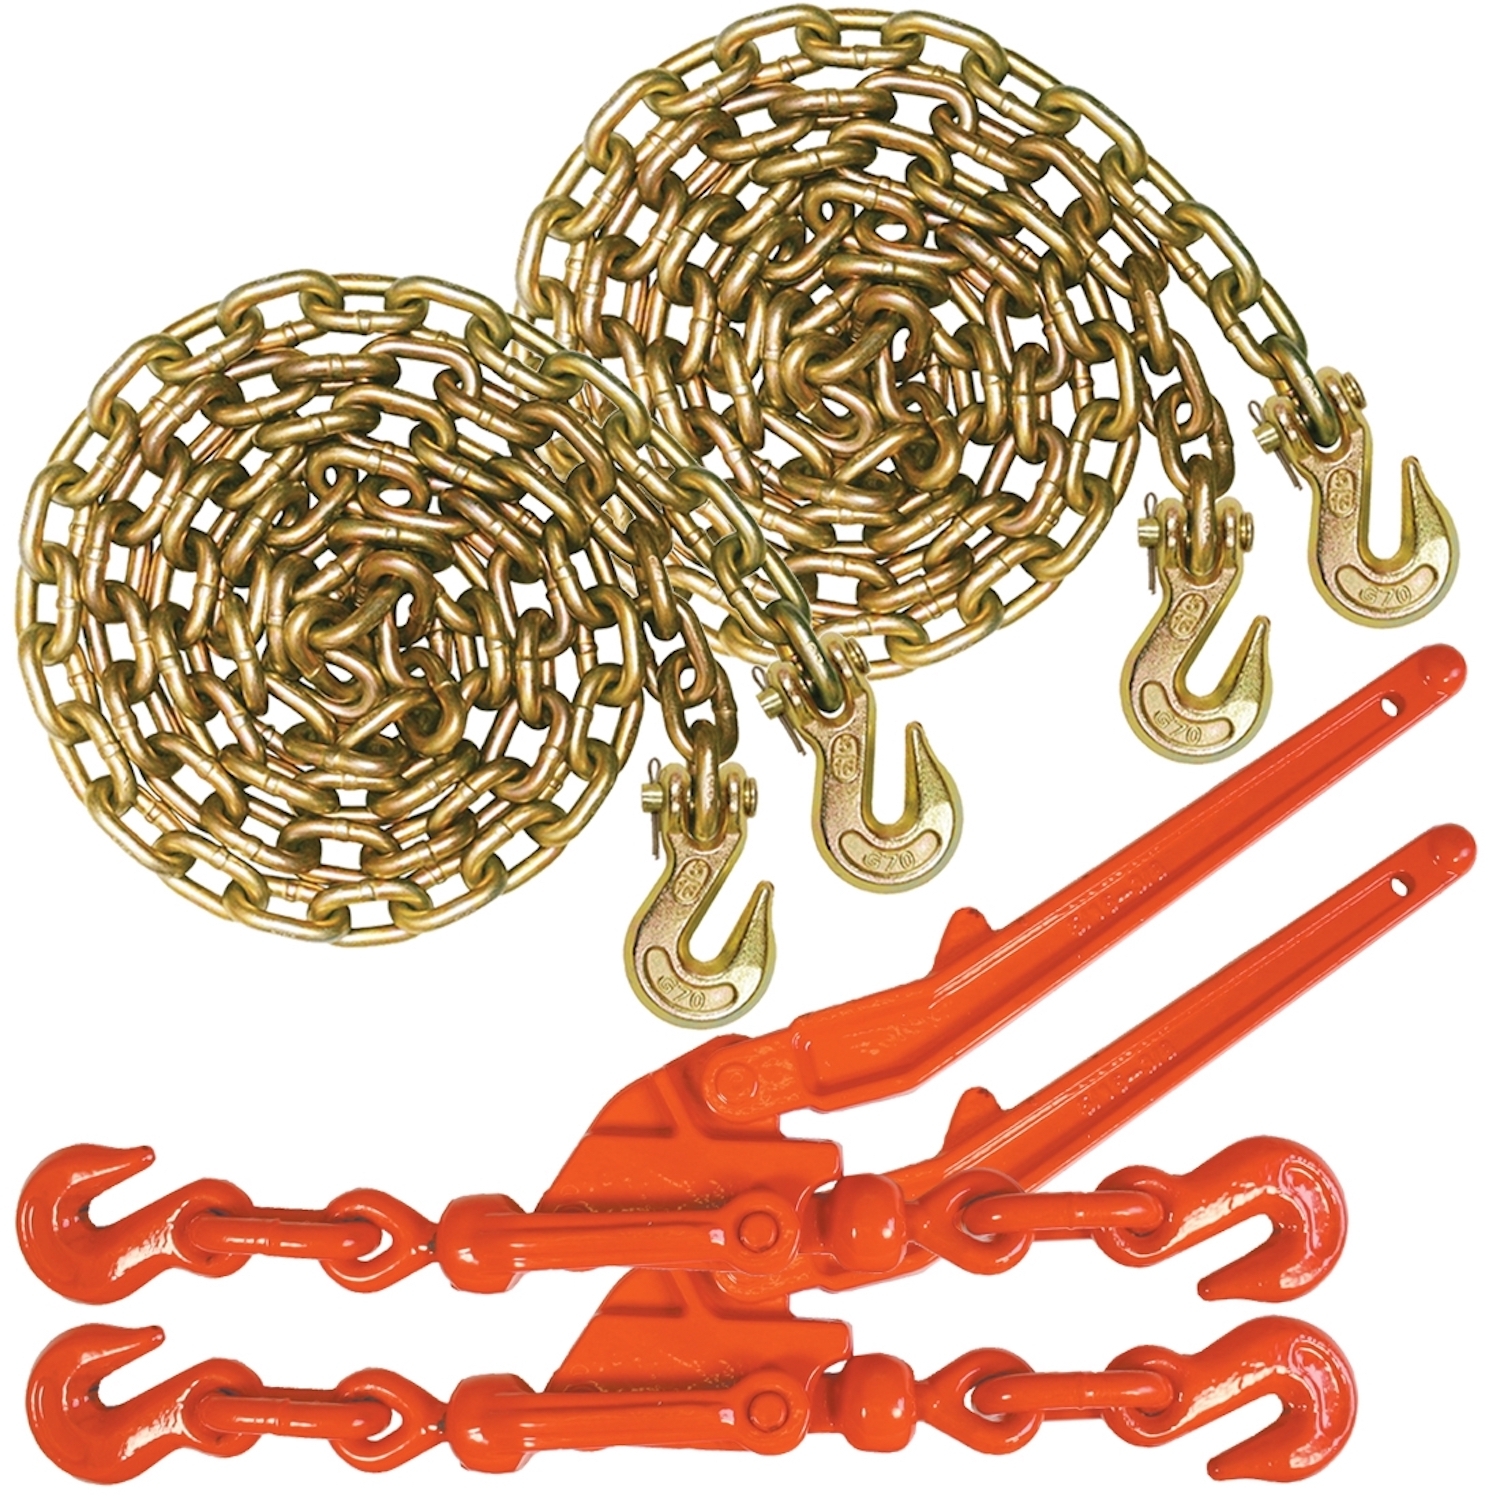 Vulcan Chain and Load Binder Kit - Grade 70 - 5/16 inch x 20 Foot - 4,700 Pound Safe Working Load BTK332